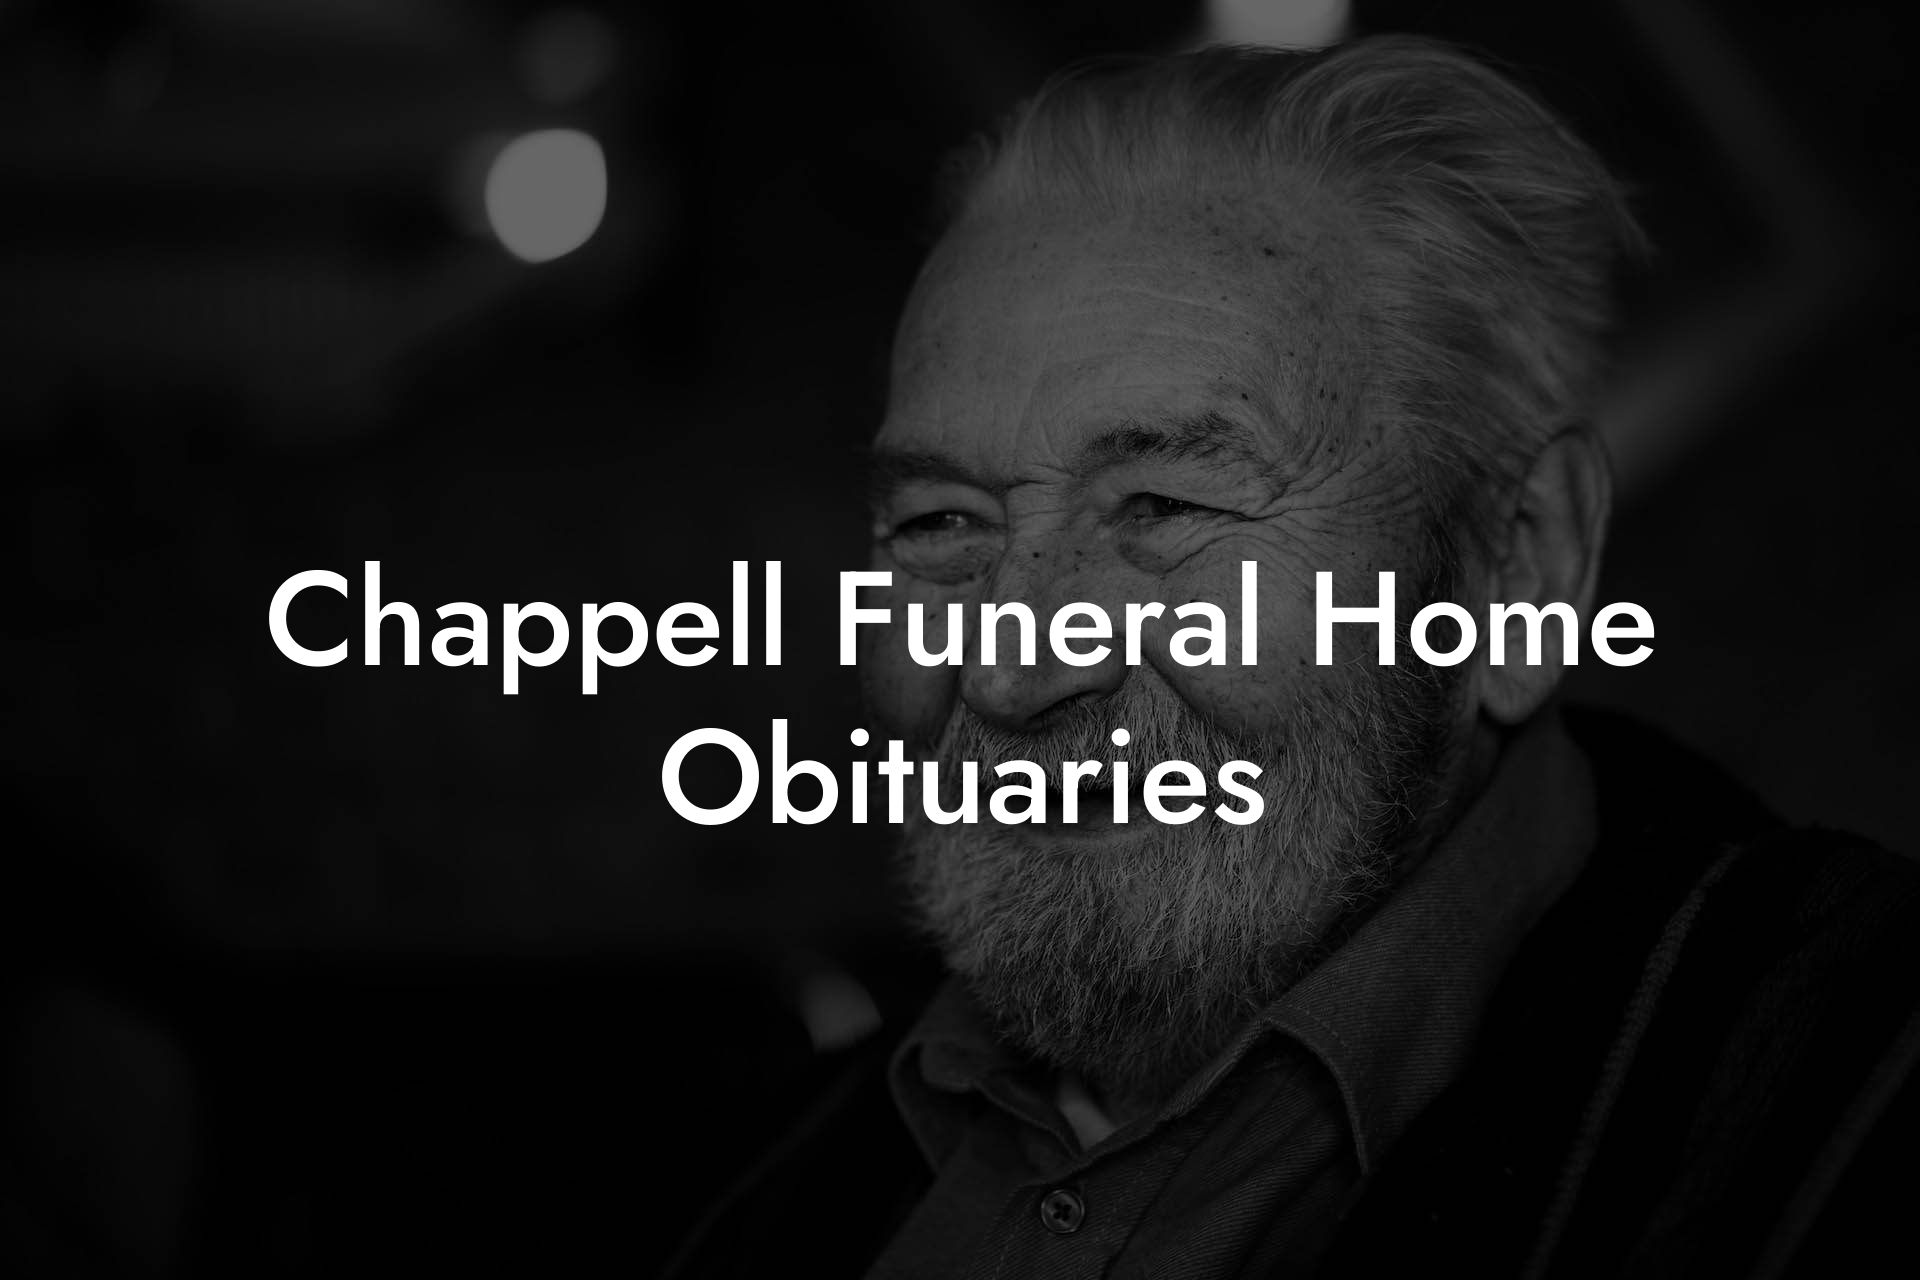 Chappell Funeral Home Obituaries